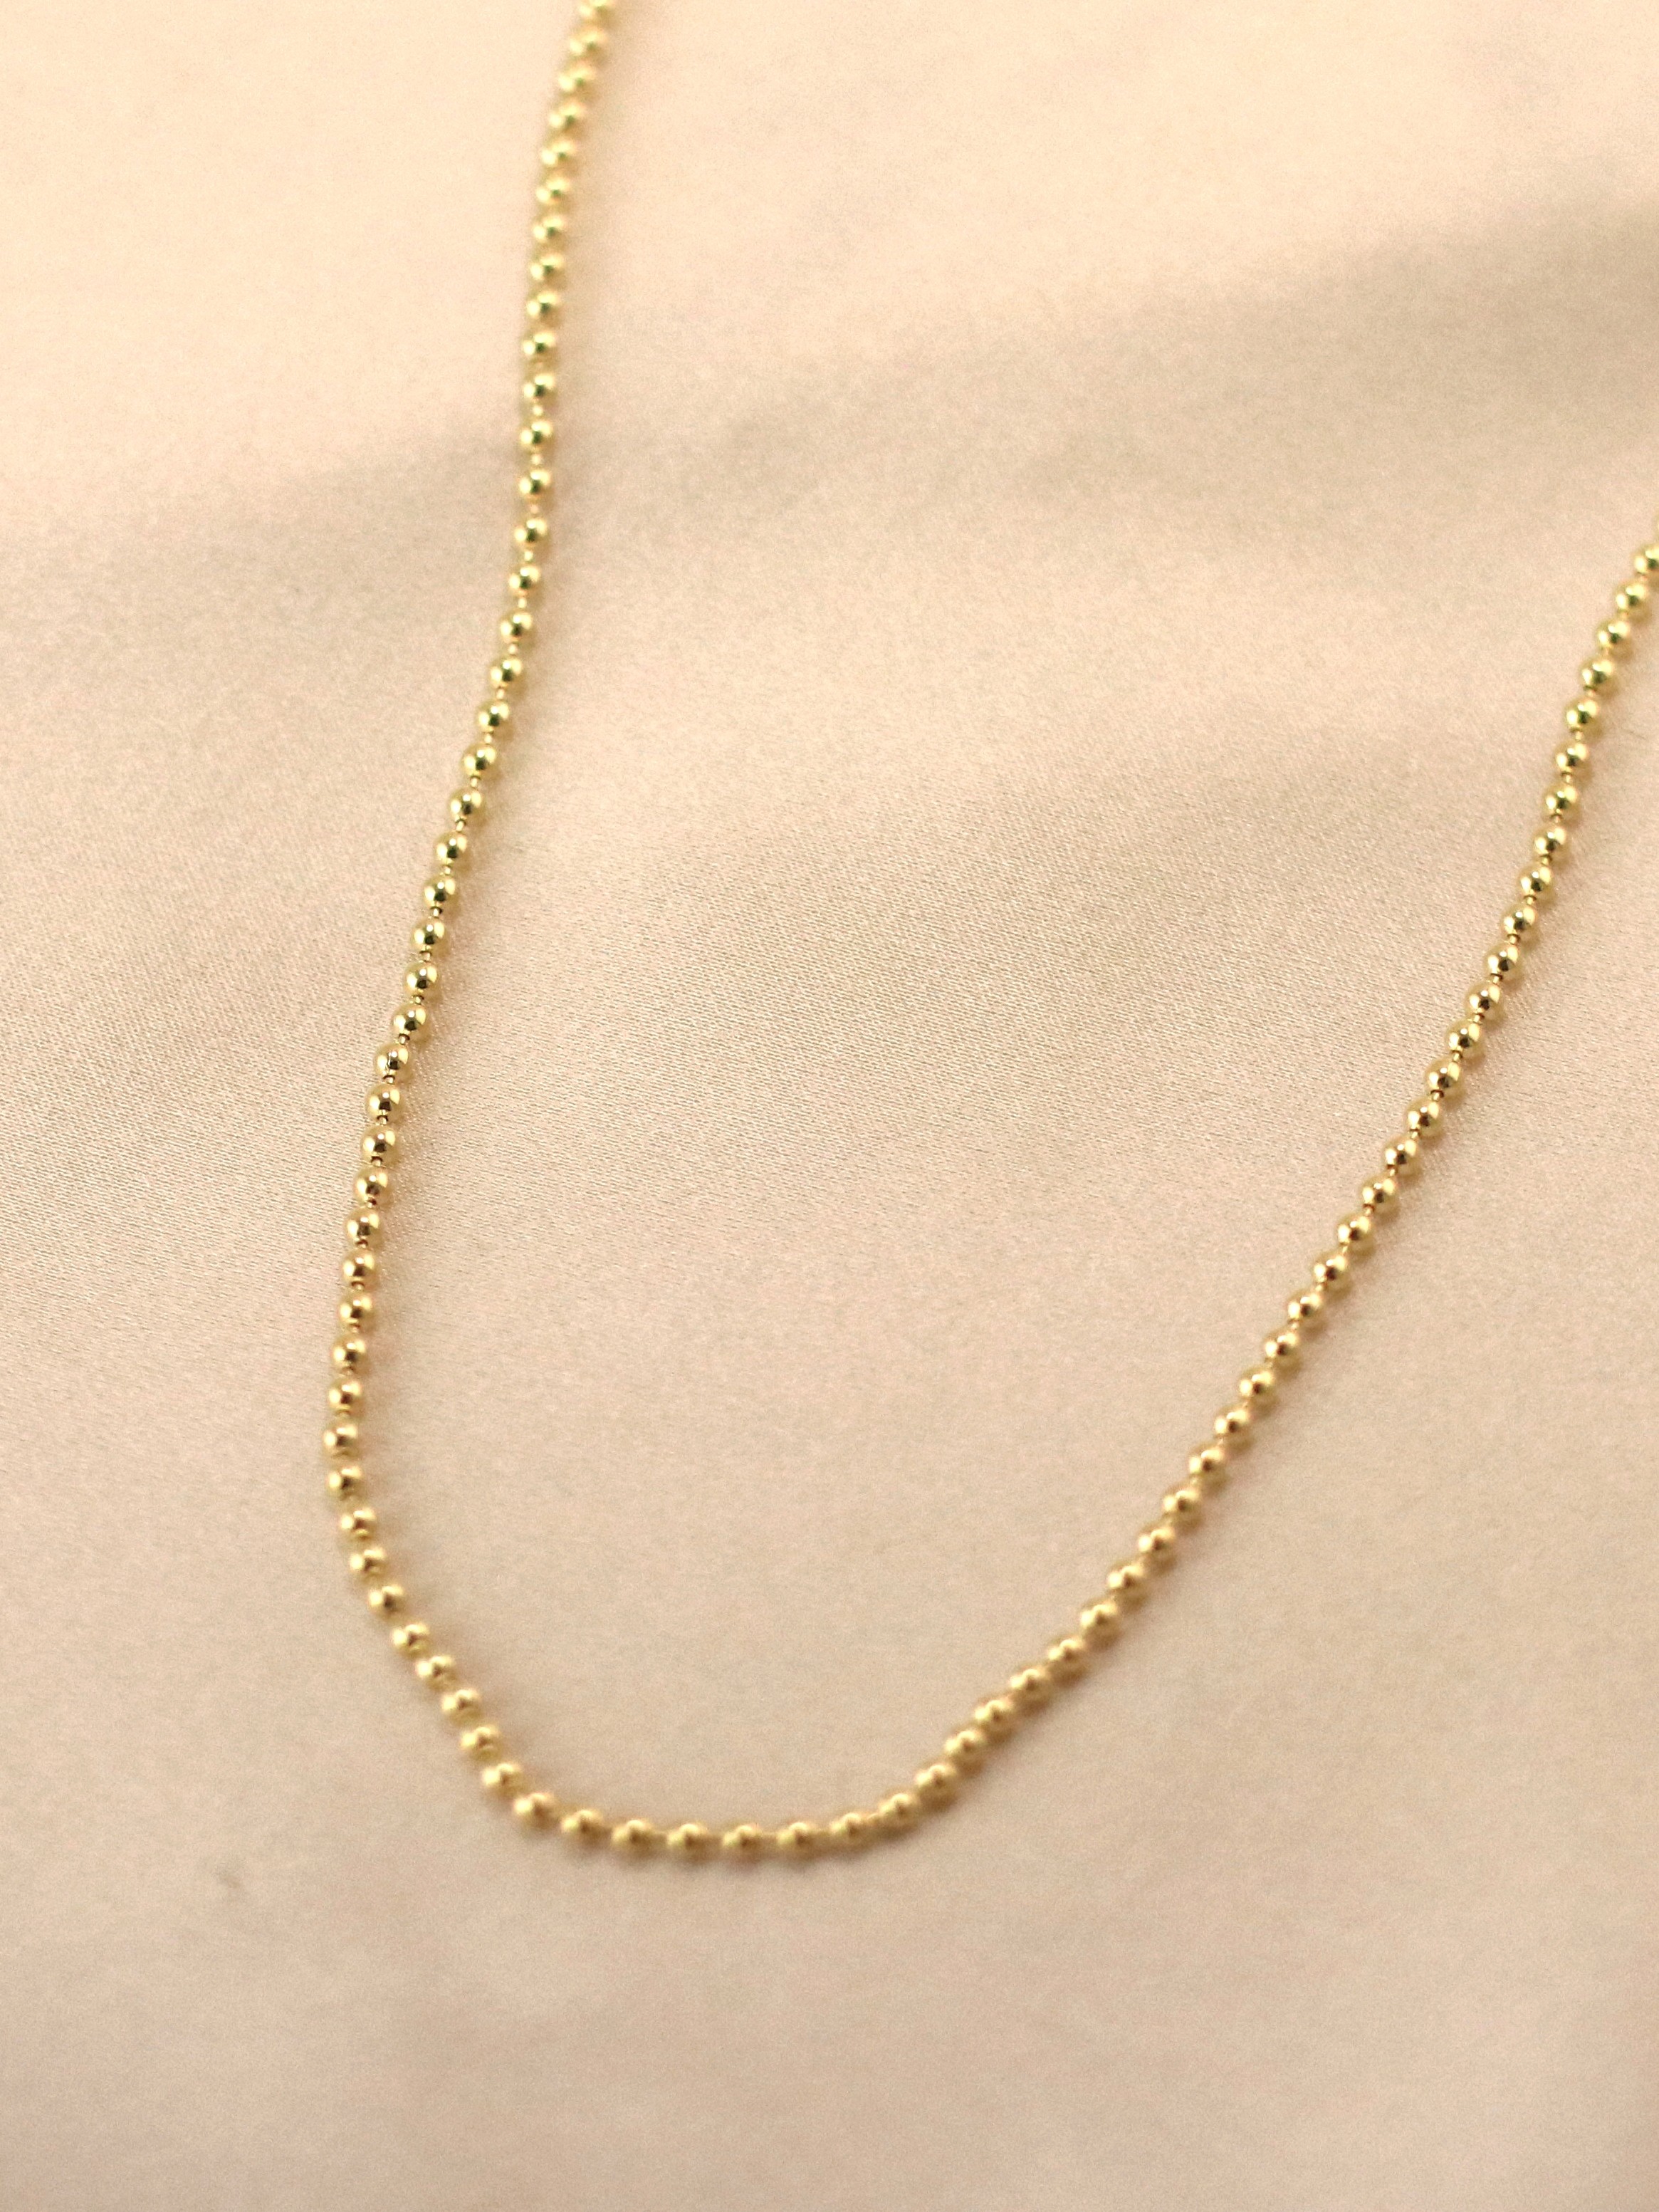 Novelty Minimal Celebrity Small Ball Bead 18K Rose Gold Plated Chain Necklace 